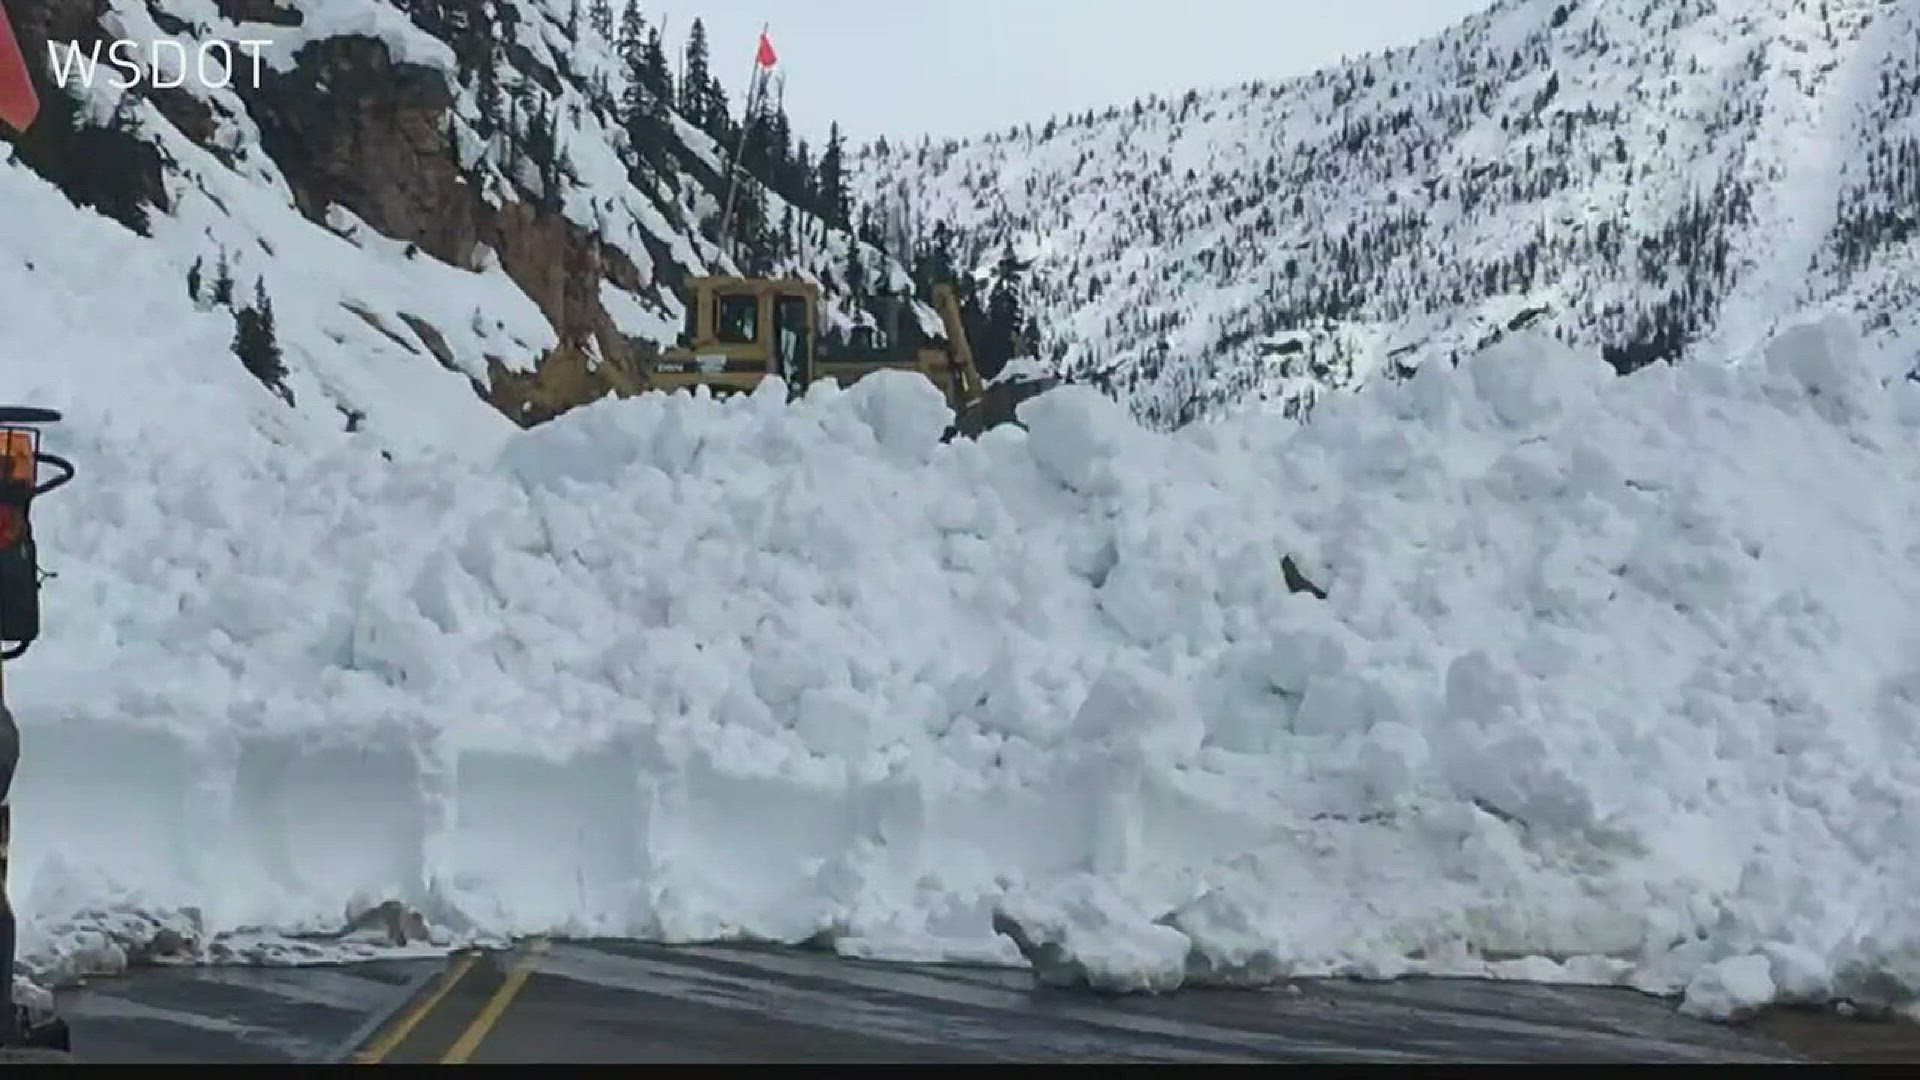 SR20 North Cascades Highway will reopen late this year